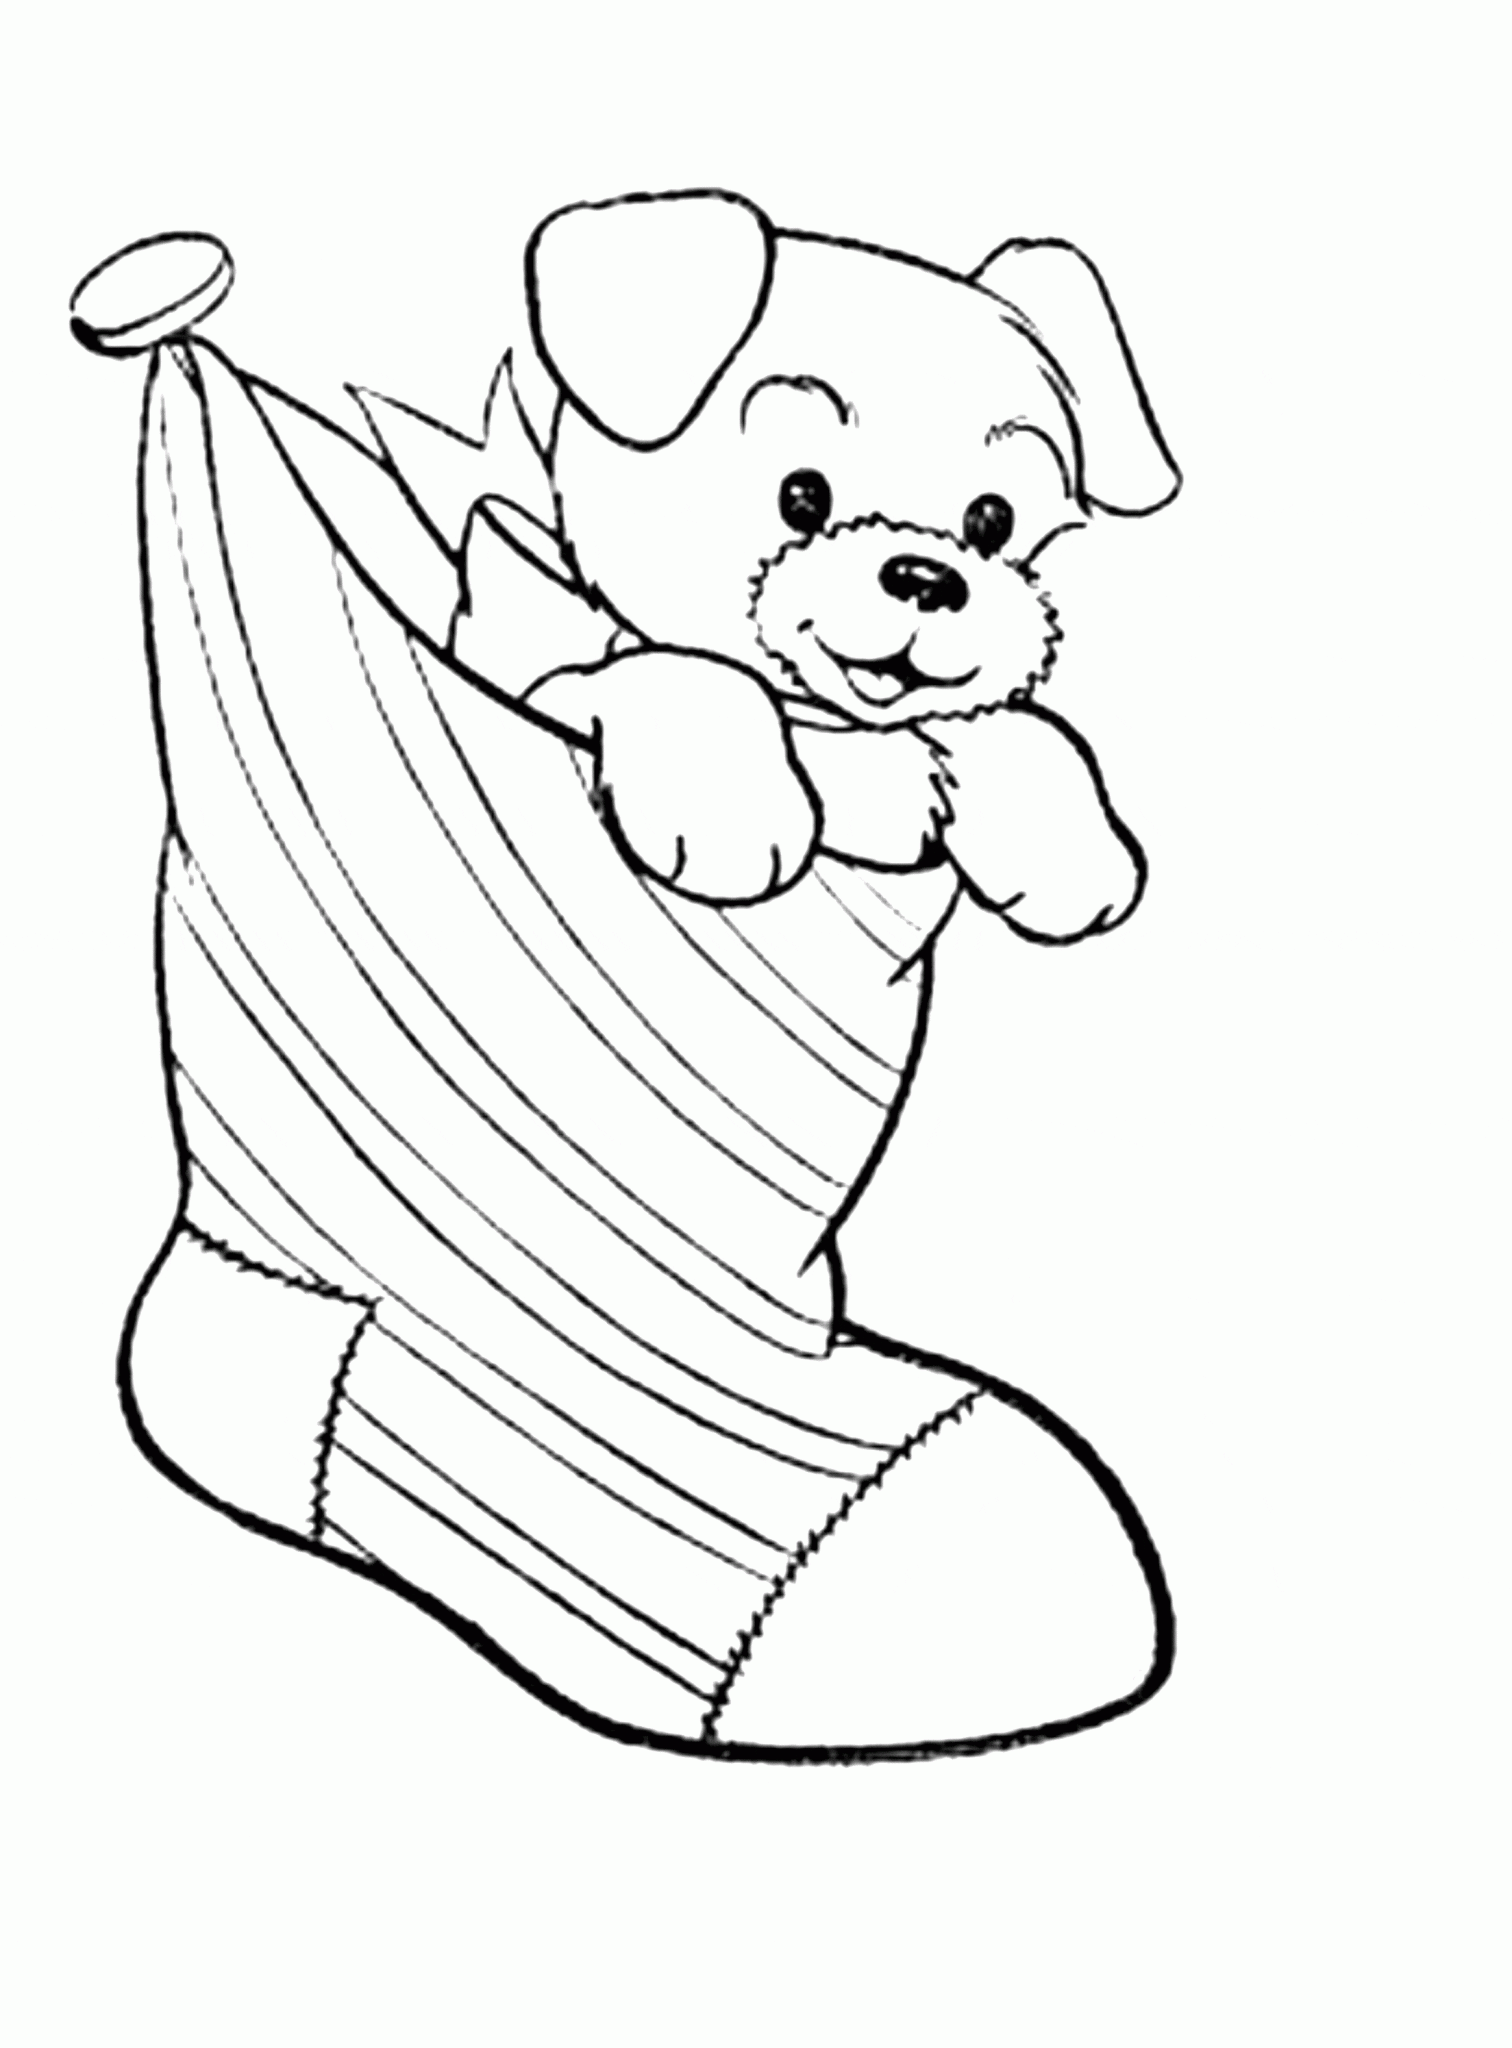 Print & Download   Draw Your Own Puppy Coloring Pages